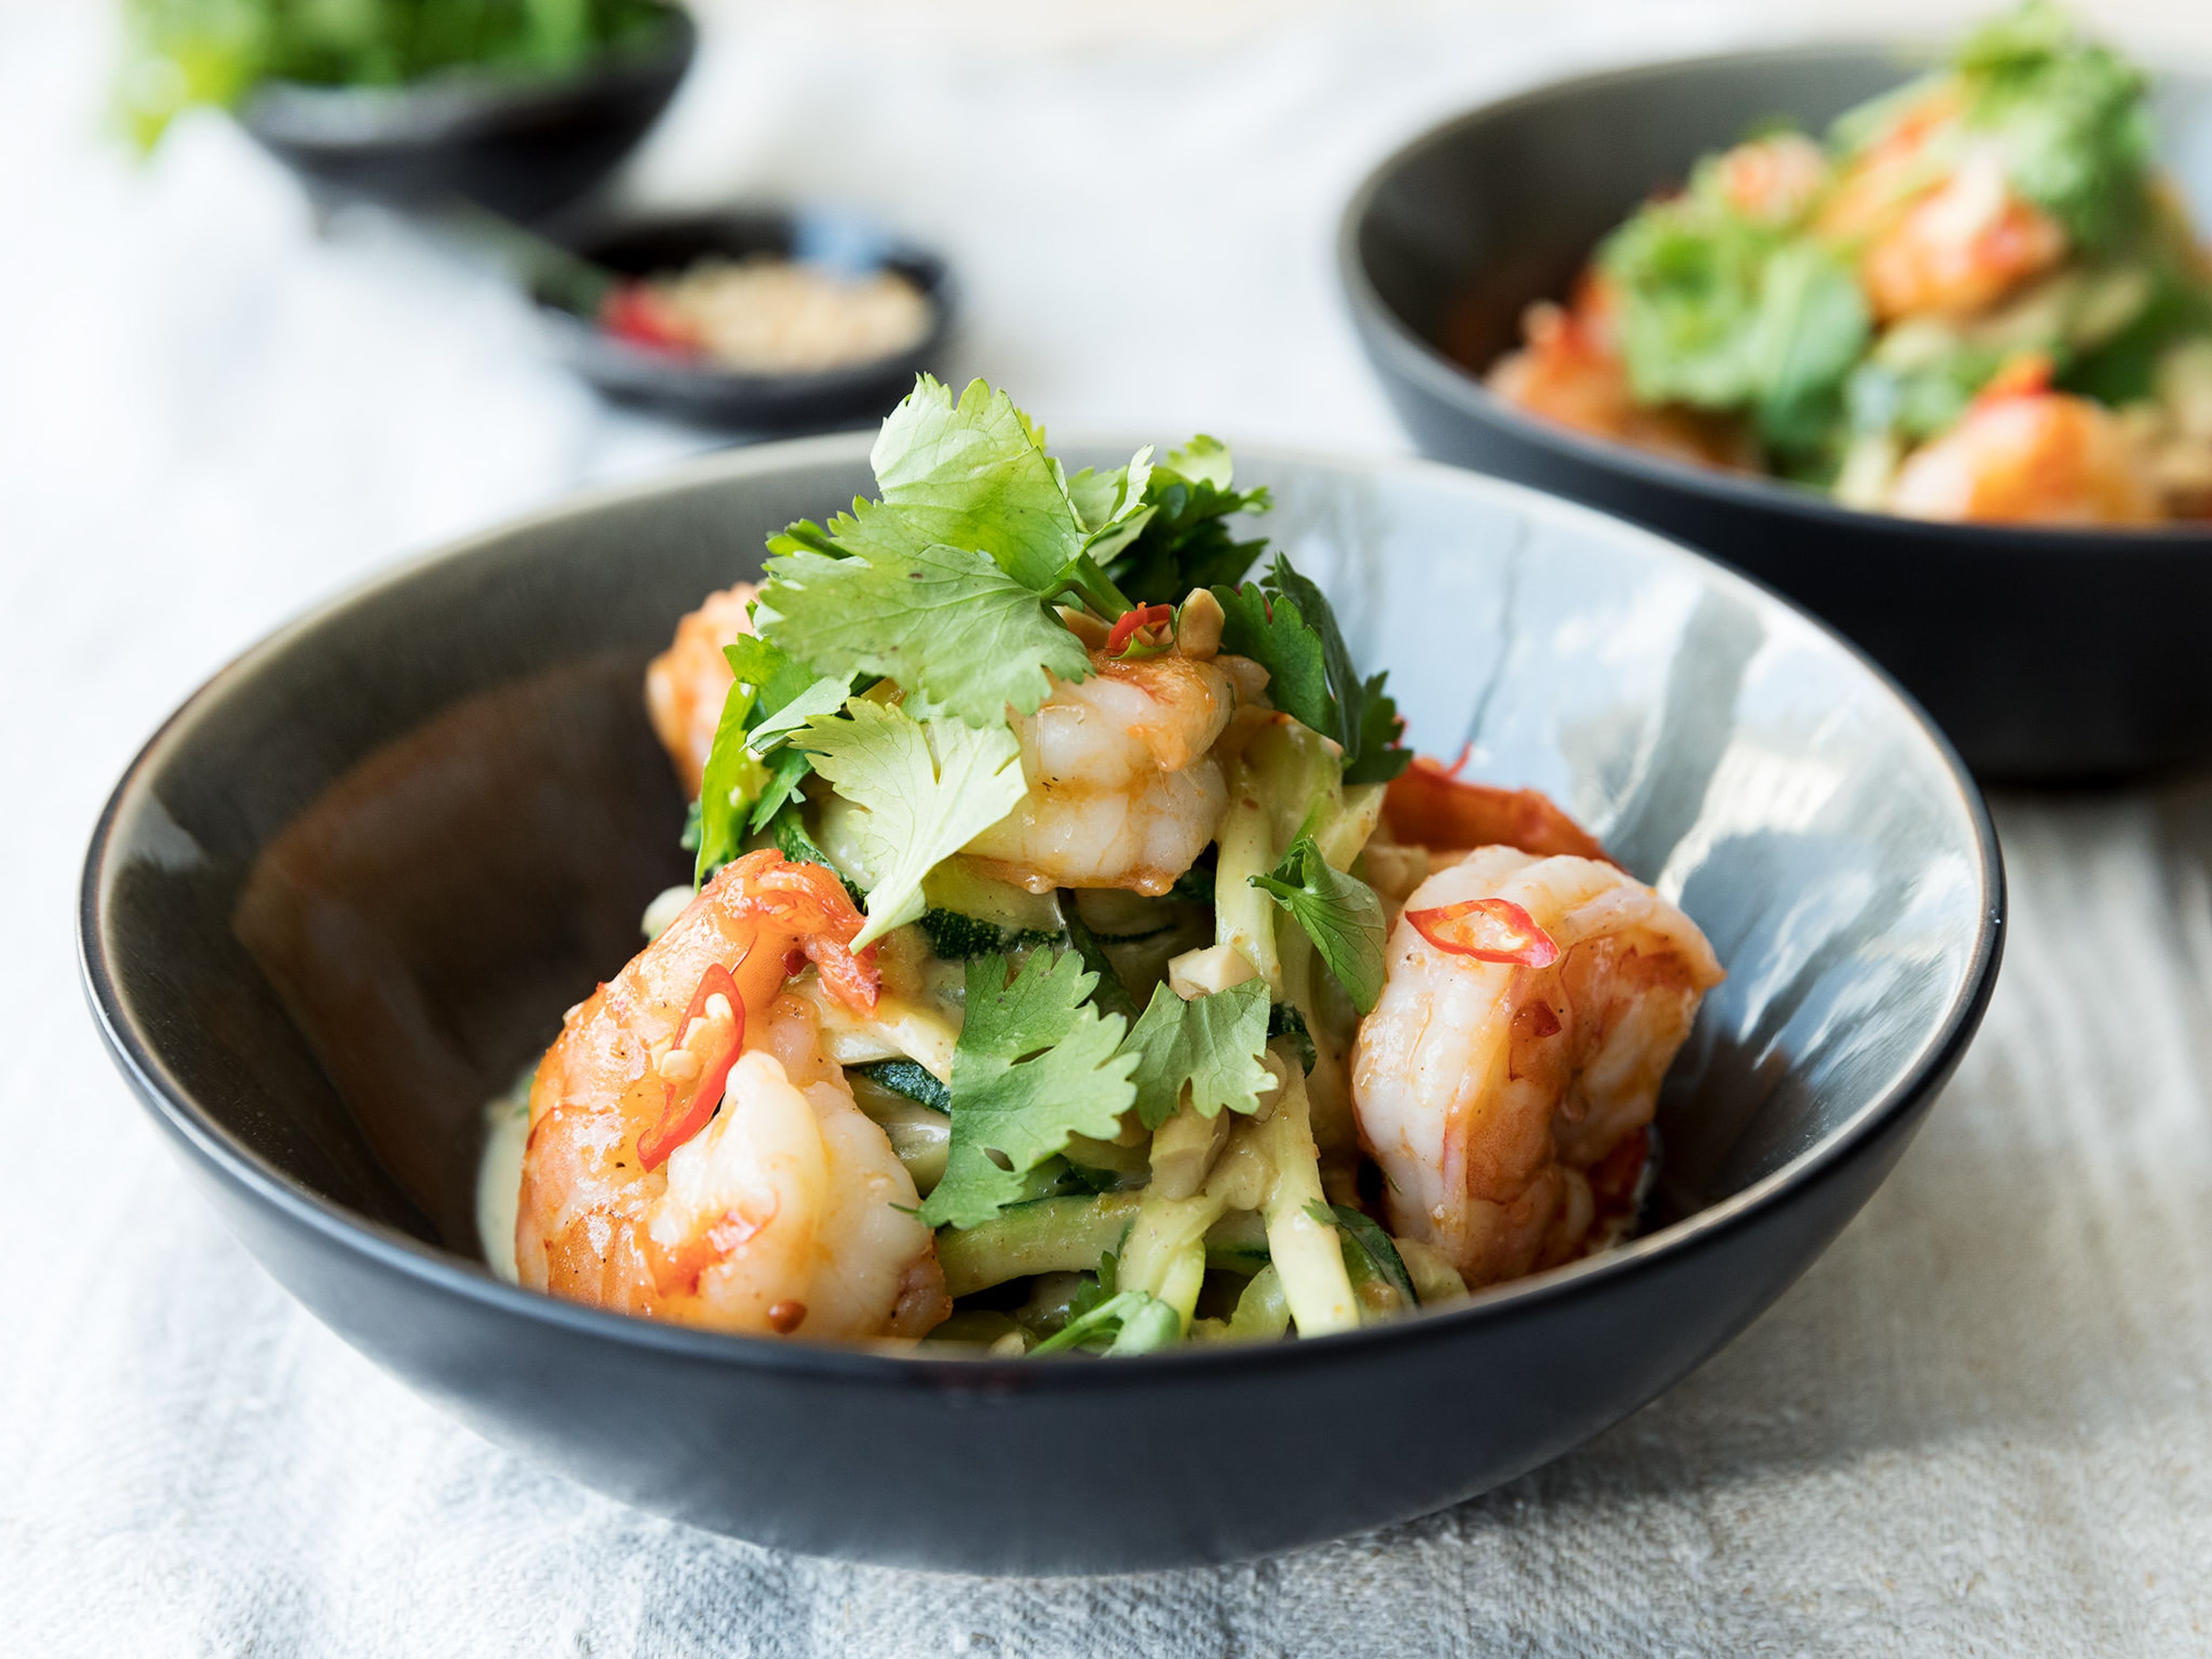 Spicy peanut zucchini noodles with shrimp